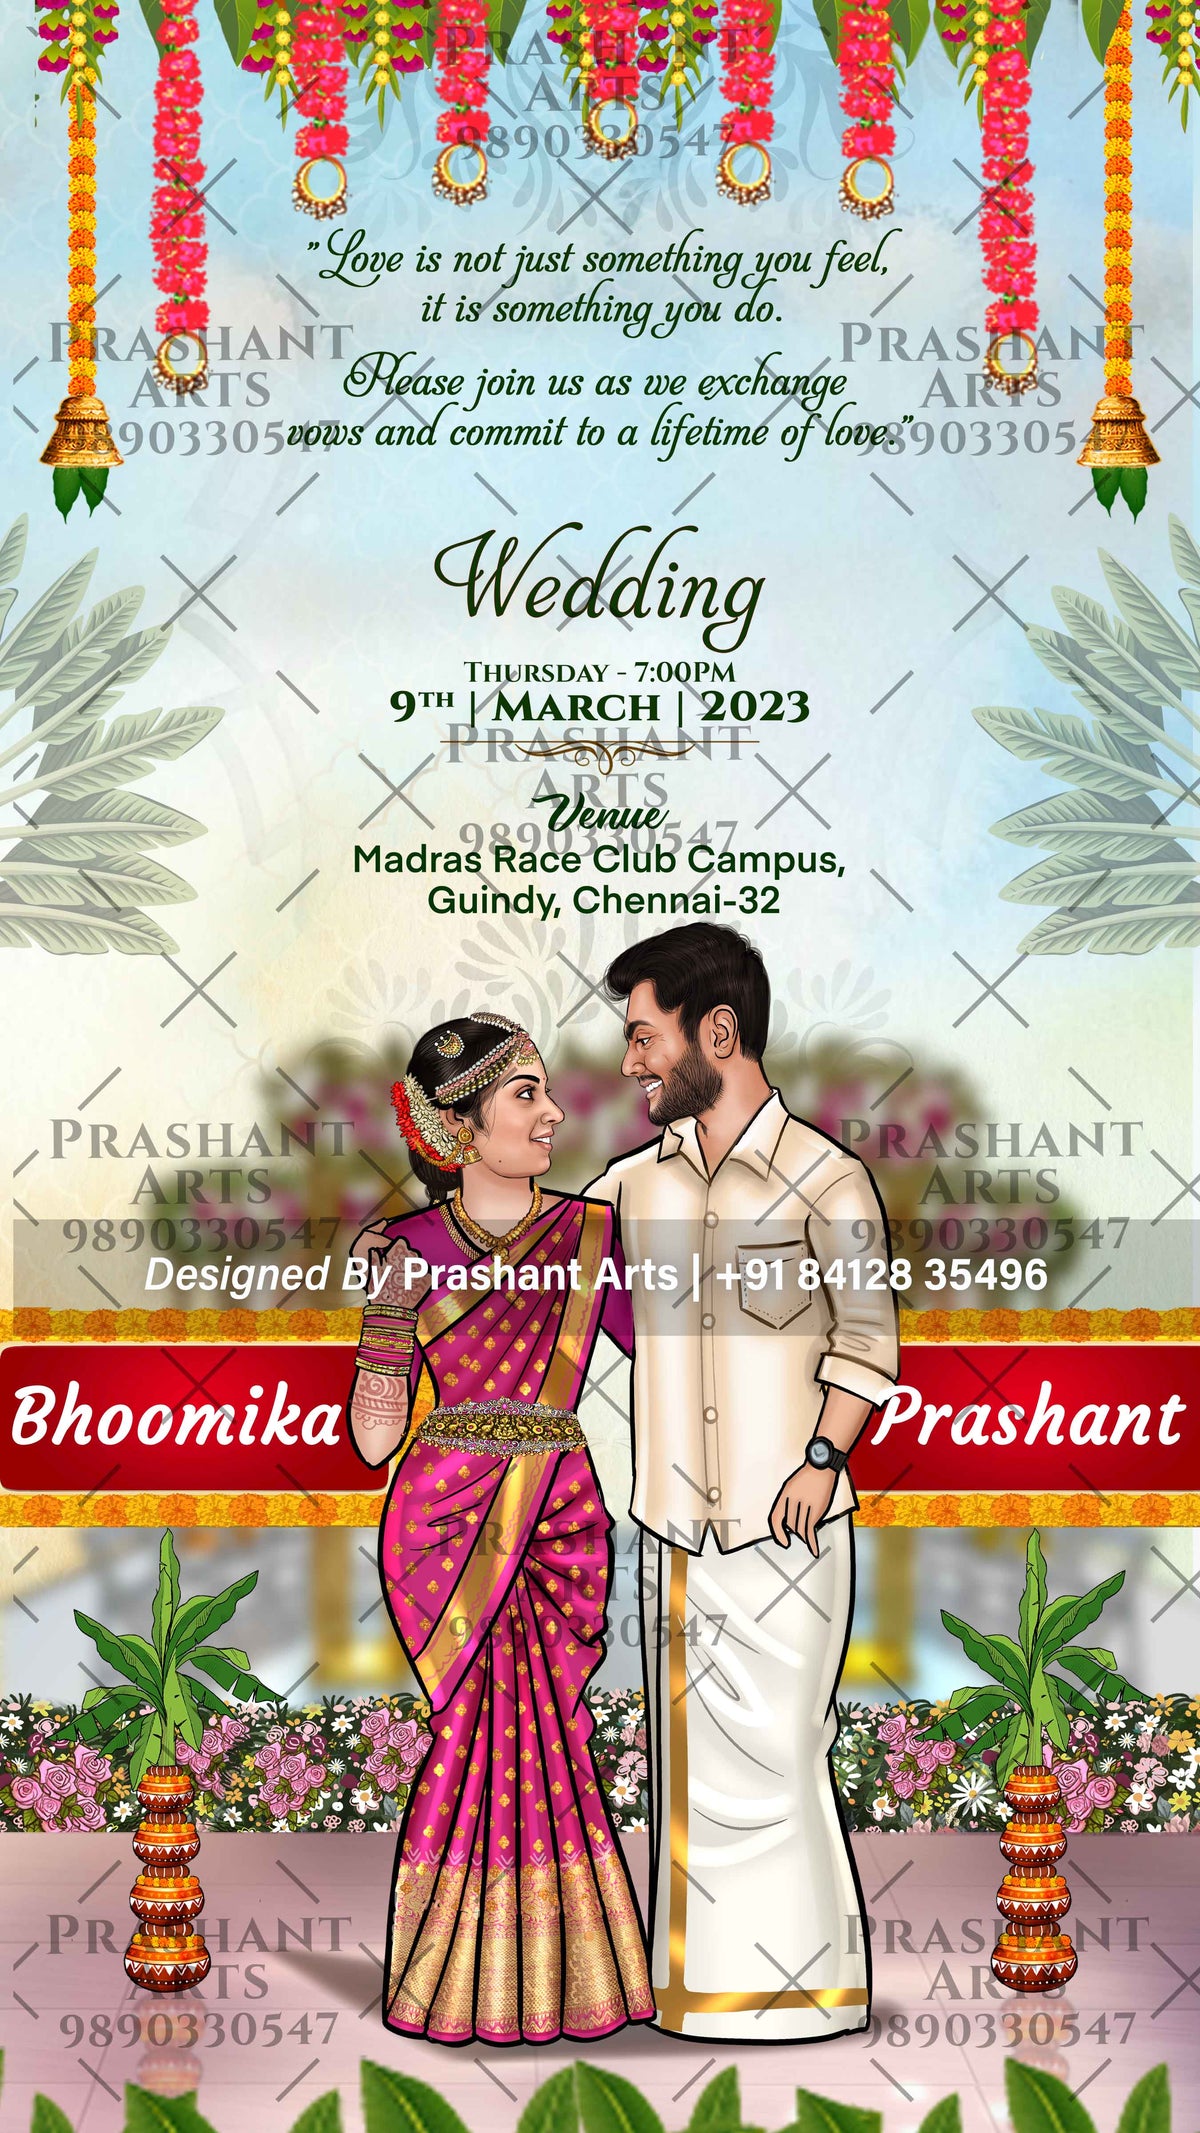 Announce Your South Indian Wedding with Eye-Catching Caricature Invites | SIC-004